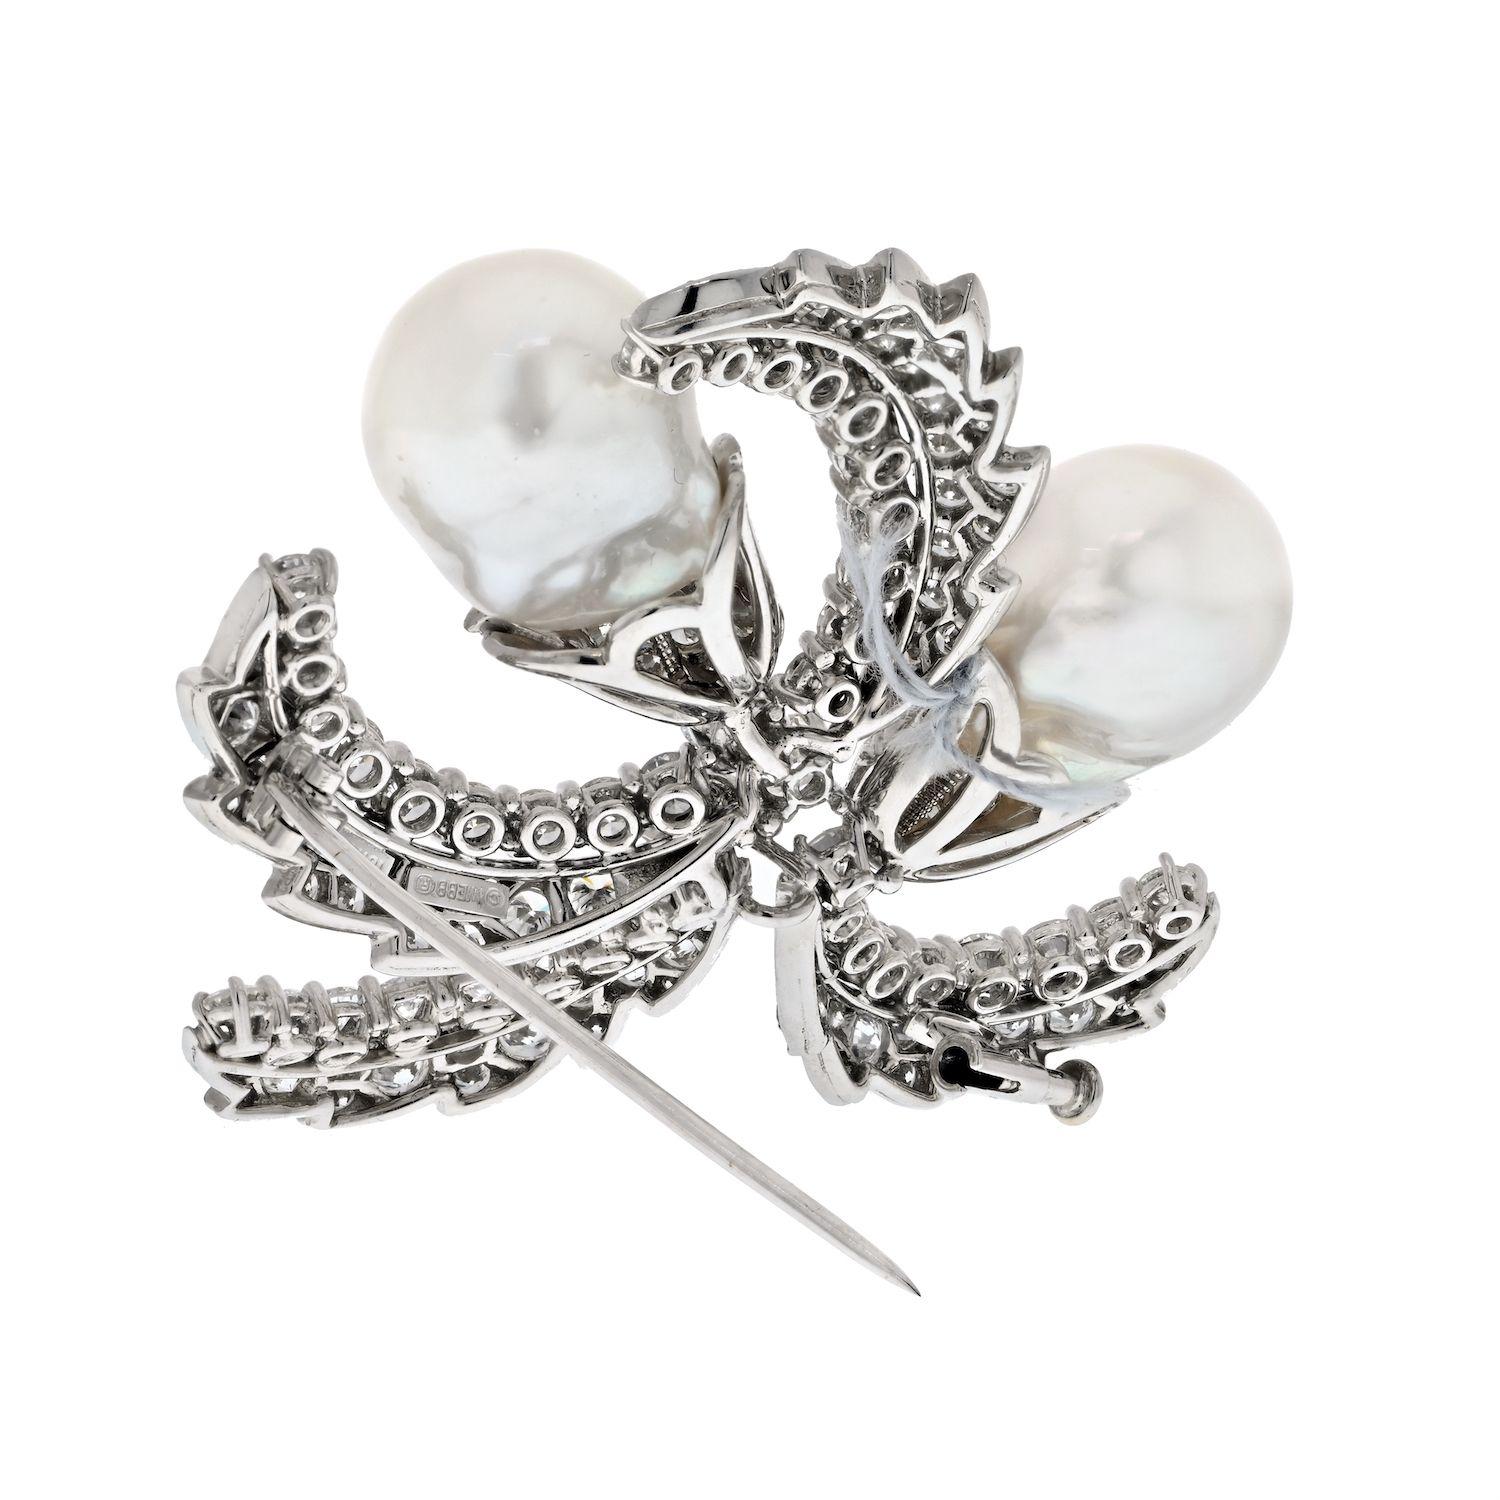 Baroque pearls and diamond brooch in platinum by David Webb. Leaves are mounted with 15cts of round cut diamonds. Spectacular size and spread. Diamonds are of F-G color VS clarity. 
Width: 5cm. 